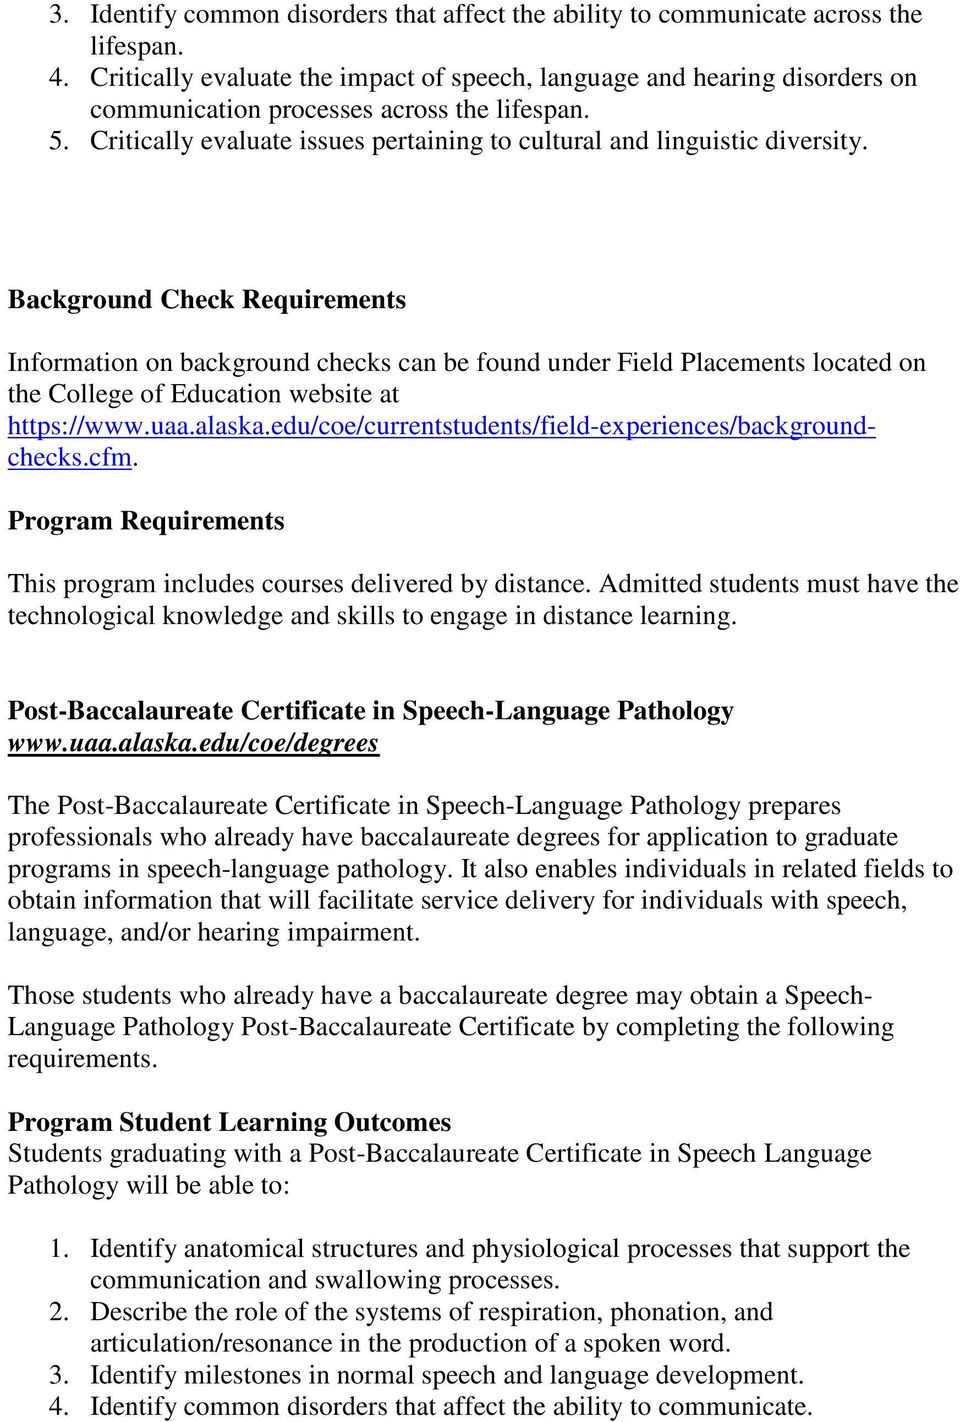 Background Check Requirements Information on background checks can be found under Field Placements located on the College of Education website at https://www.uaa.alaska.